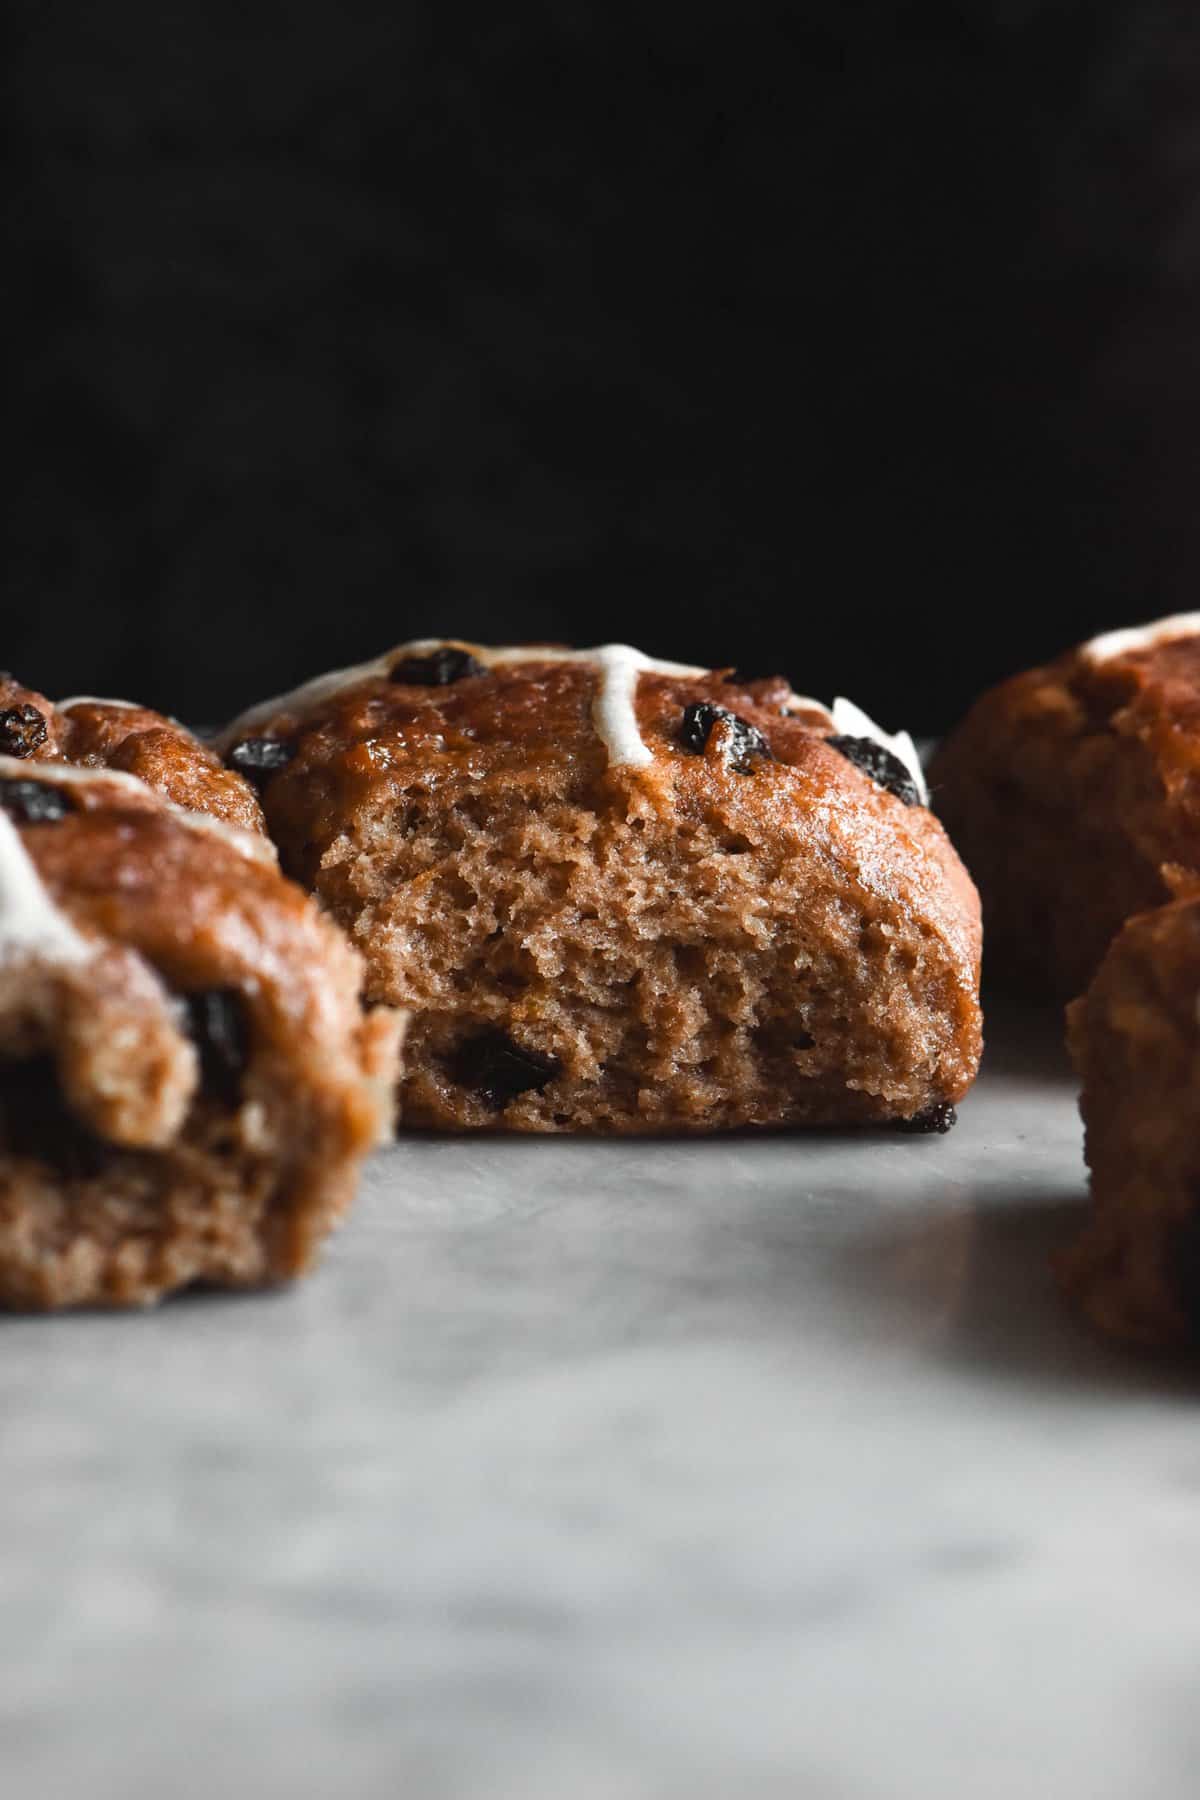 A side on view of gluten free vegan hot cross buns. The buns are deeply spiced and flecked with raisins. They sit atop a white marble table, contrasted against a black backdrop